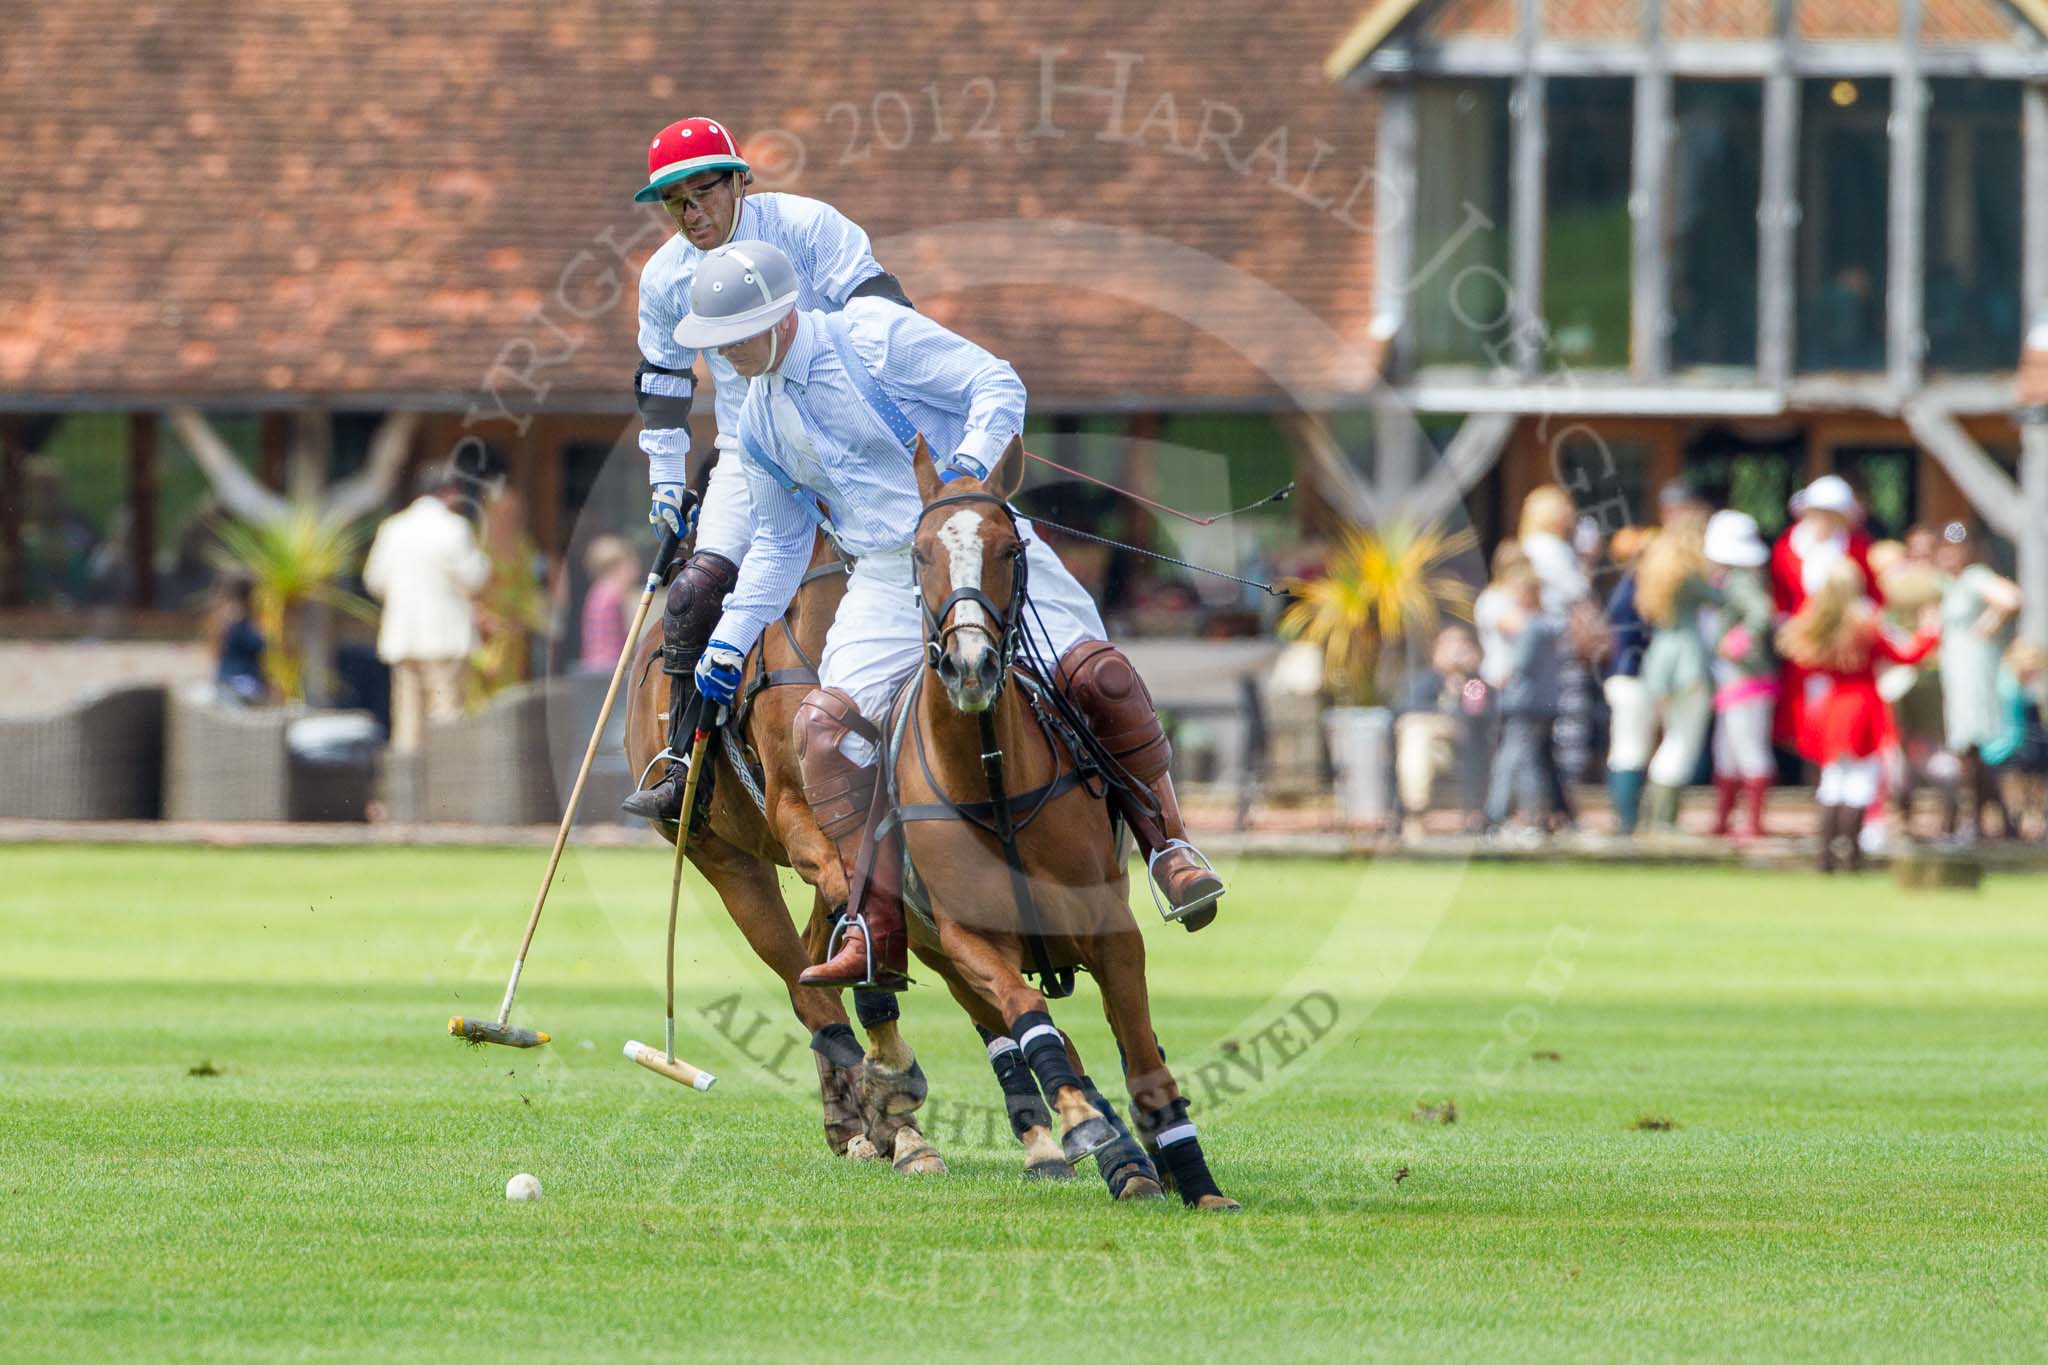 7th Heritage Polo Cup finals: Timothy Rose, Patron La Mariposa Argentina.
Hurtwood Park Polo Club,
Ewhurst Green,
Surrey,
United Kingdom,
on 05 August 2012 at 13:51, image #51